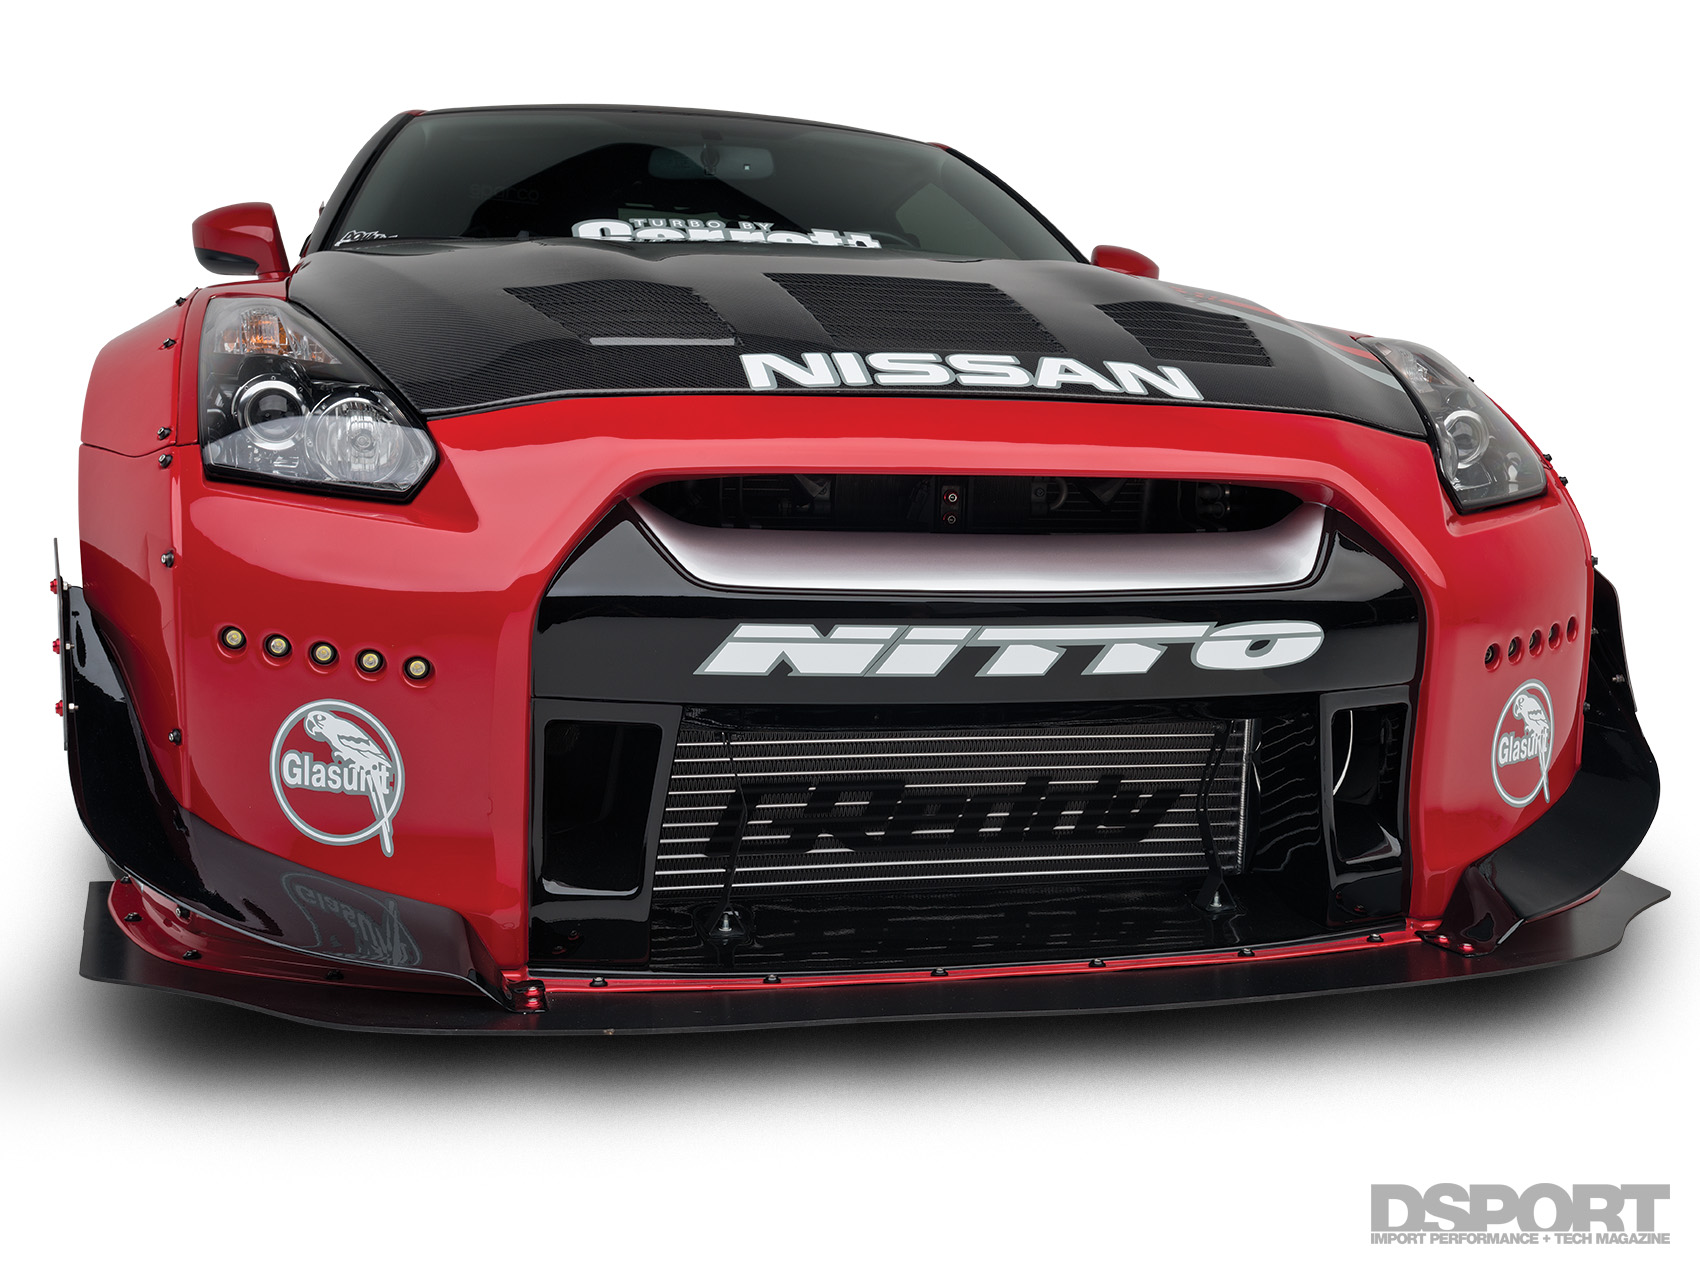 Nissan GT-R 1,150 Horsepower Show and Go - Page 3 of 4 - DSPORT Magazine